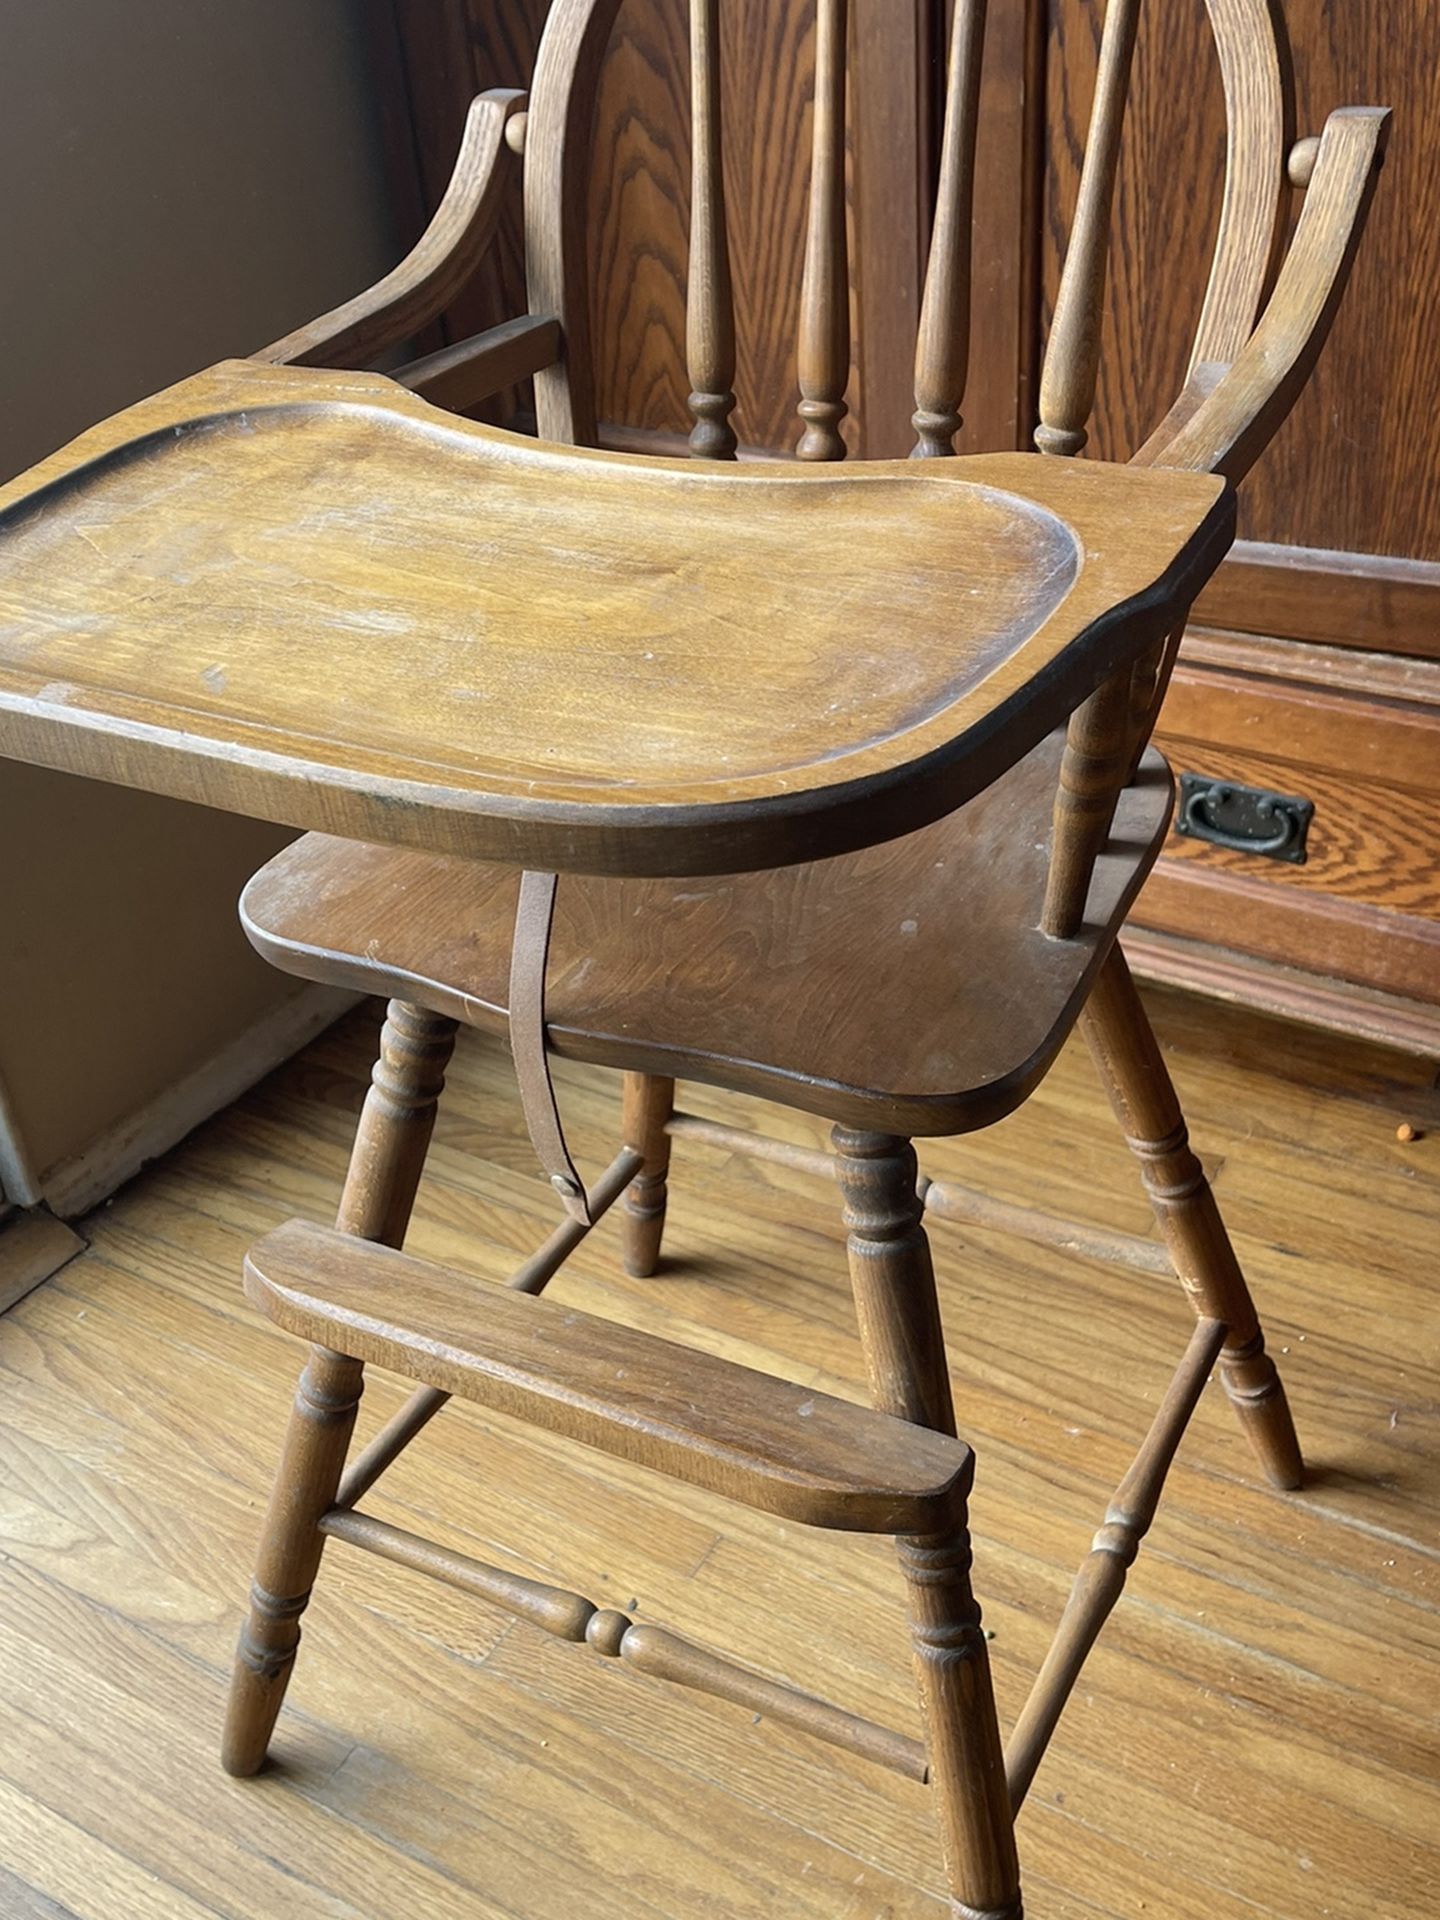 Vintage High Chair For Dolls